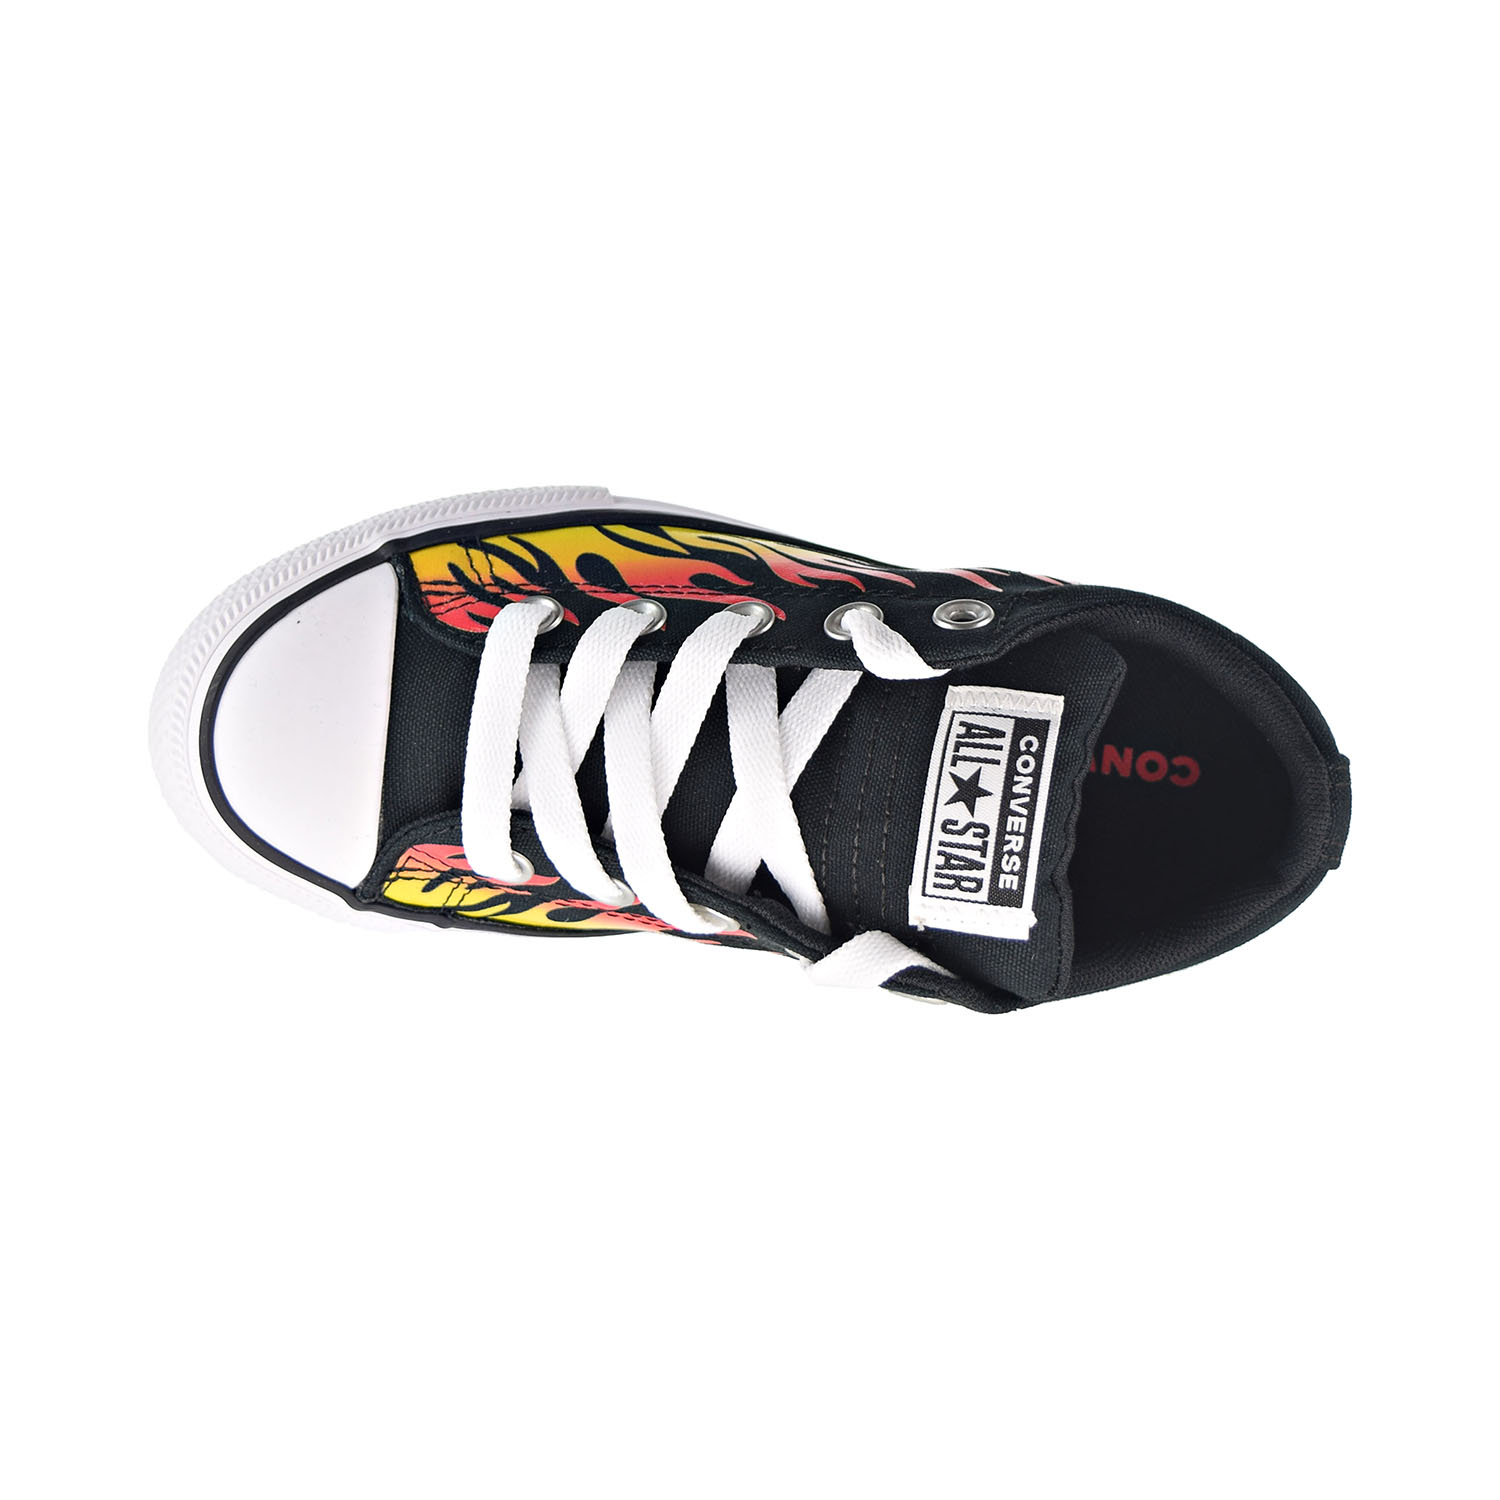 Children's Converse Chuck Taylor All Star Street Flames Slip On - image 5 of 6